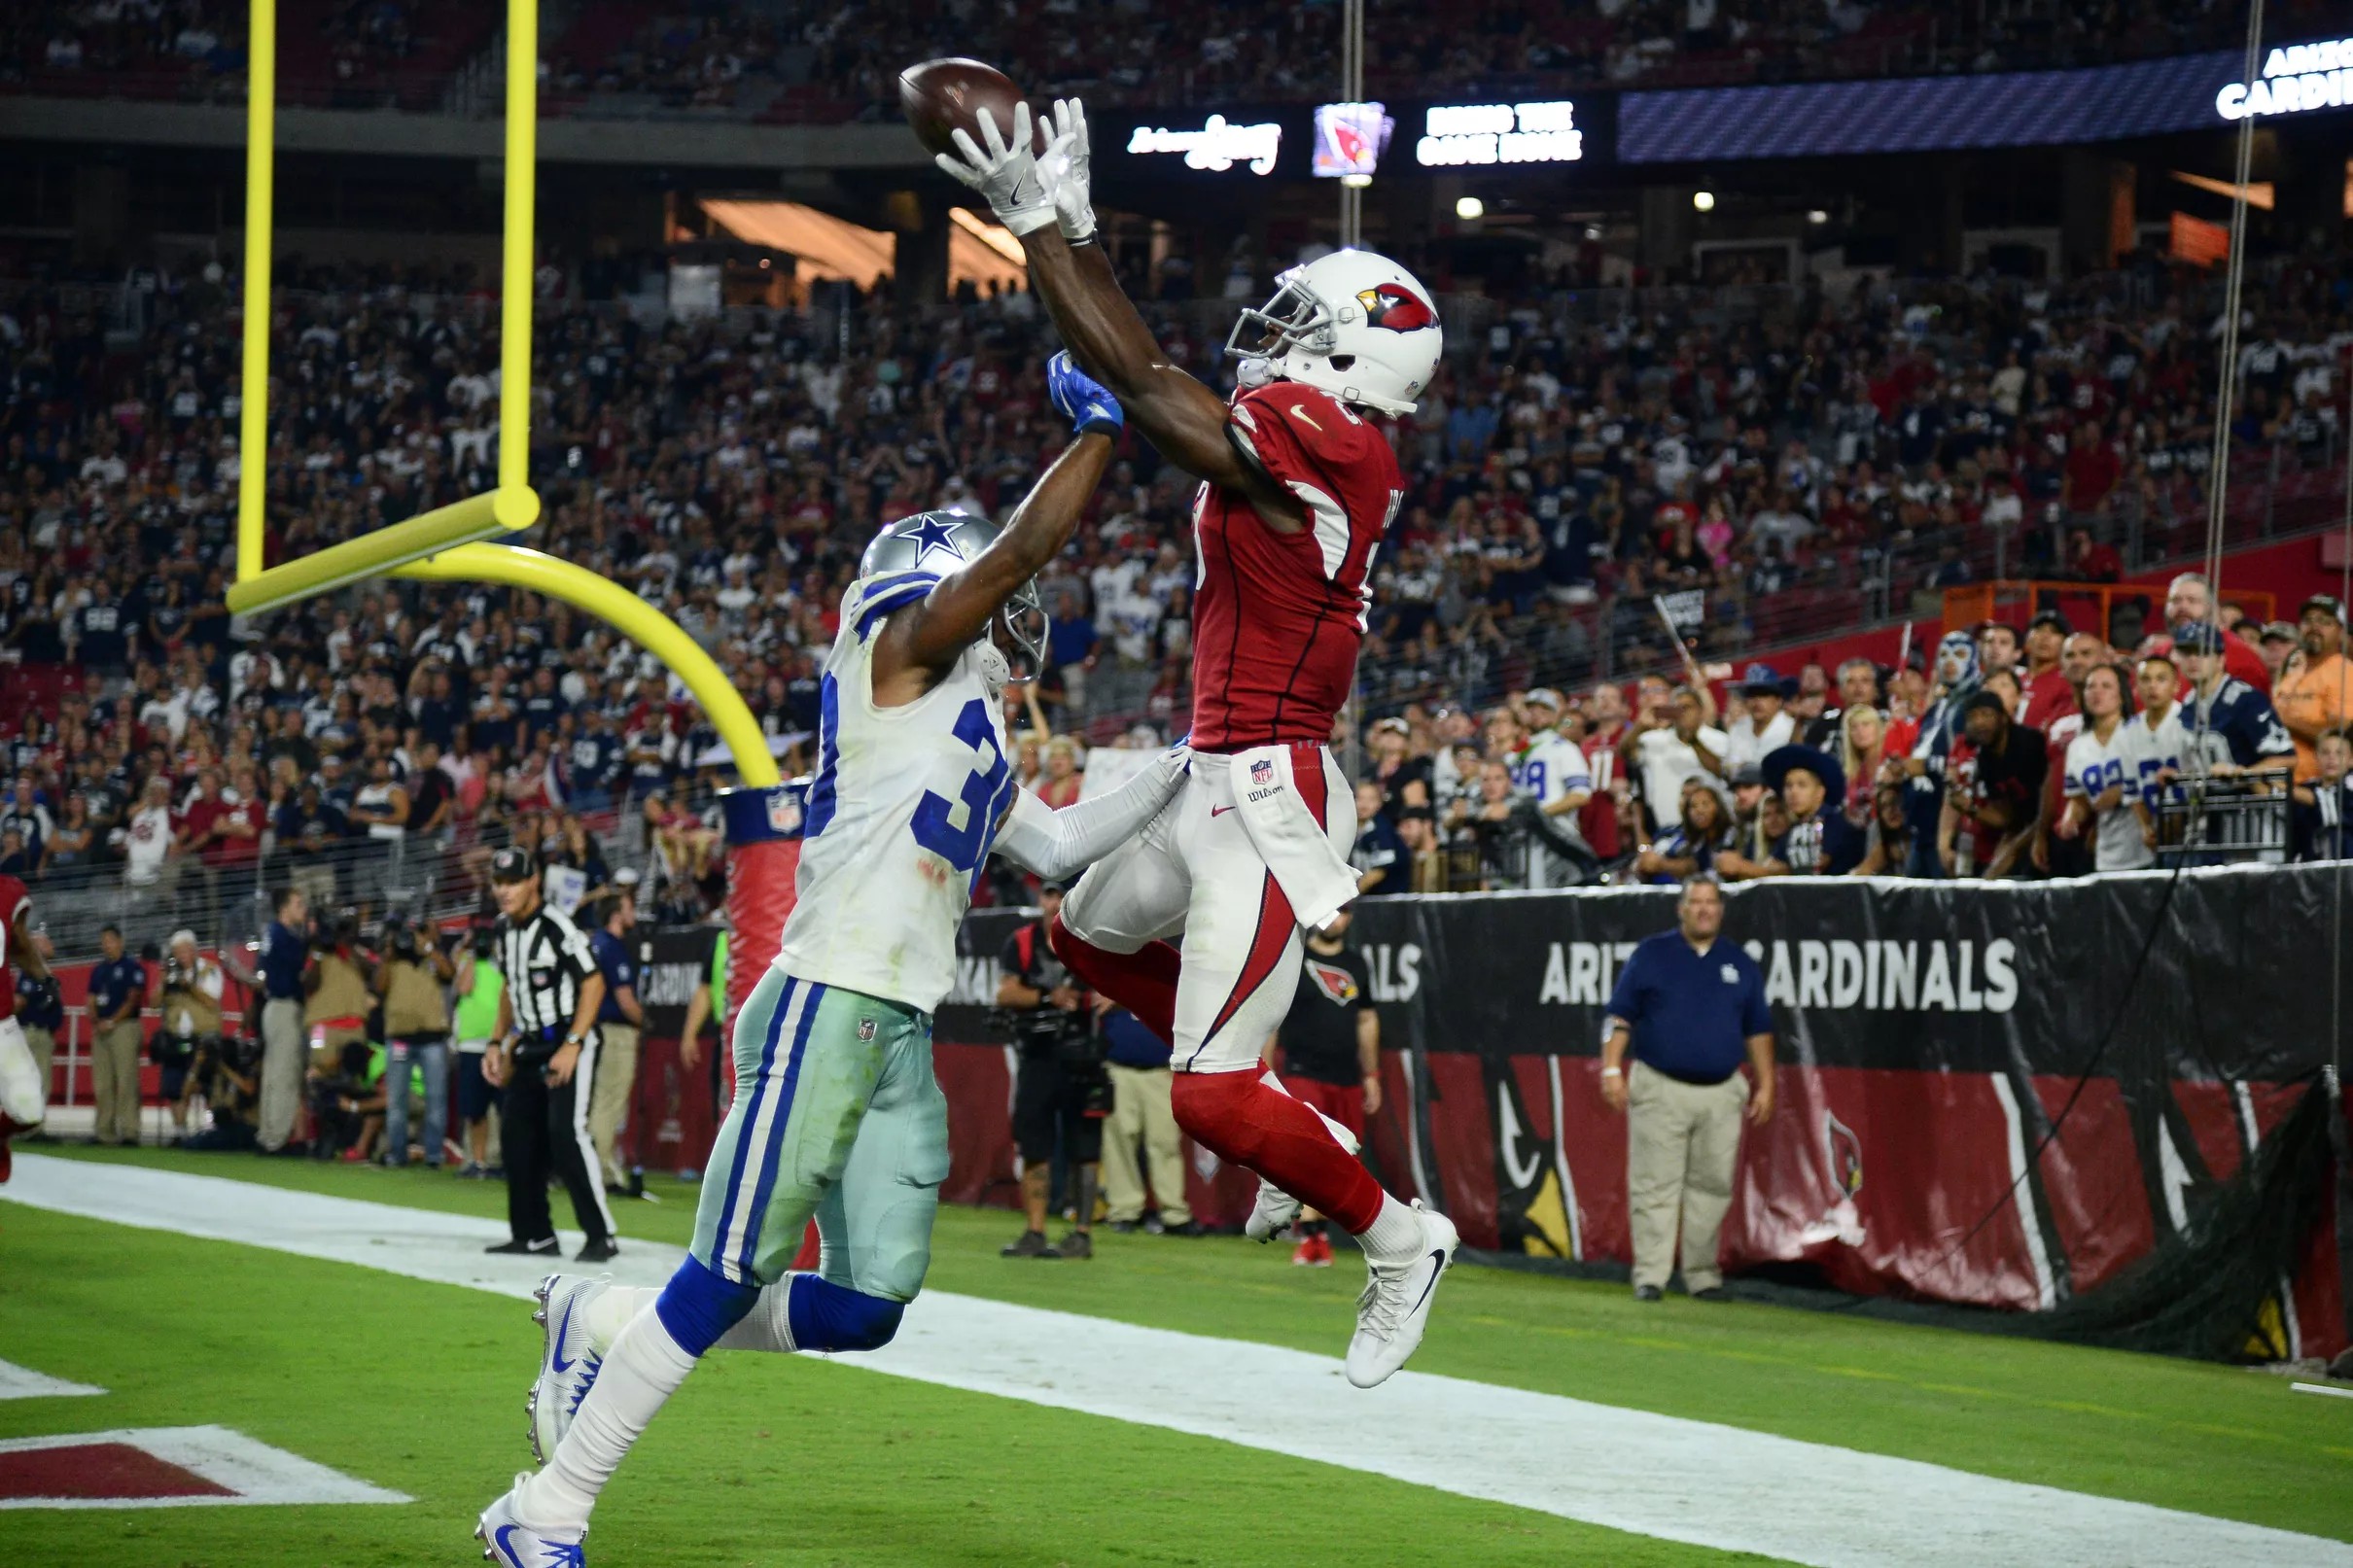 Winners and Losers from the Dallas Cowboys vs. Arizona Cardinals Monday